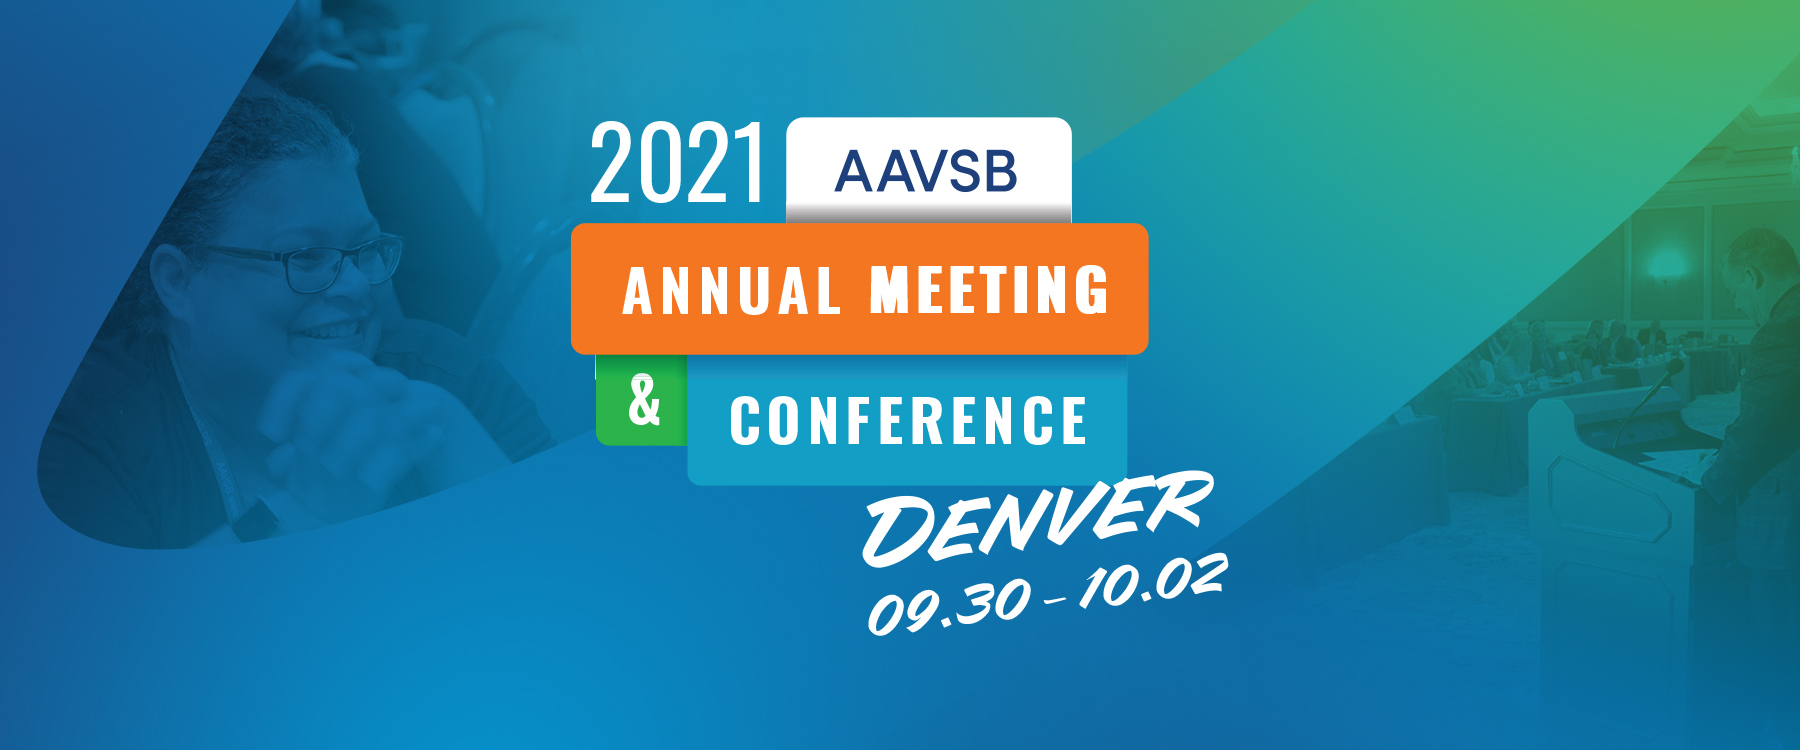 2021 AAVSB Annual Meeting & Conference